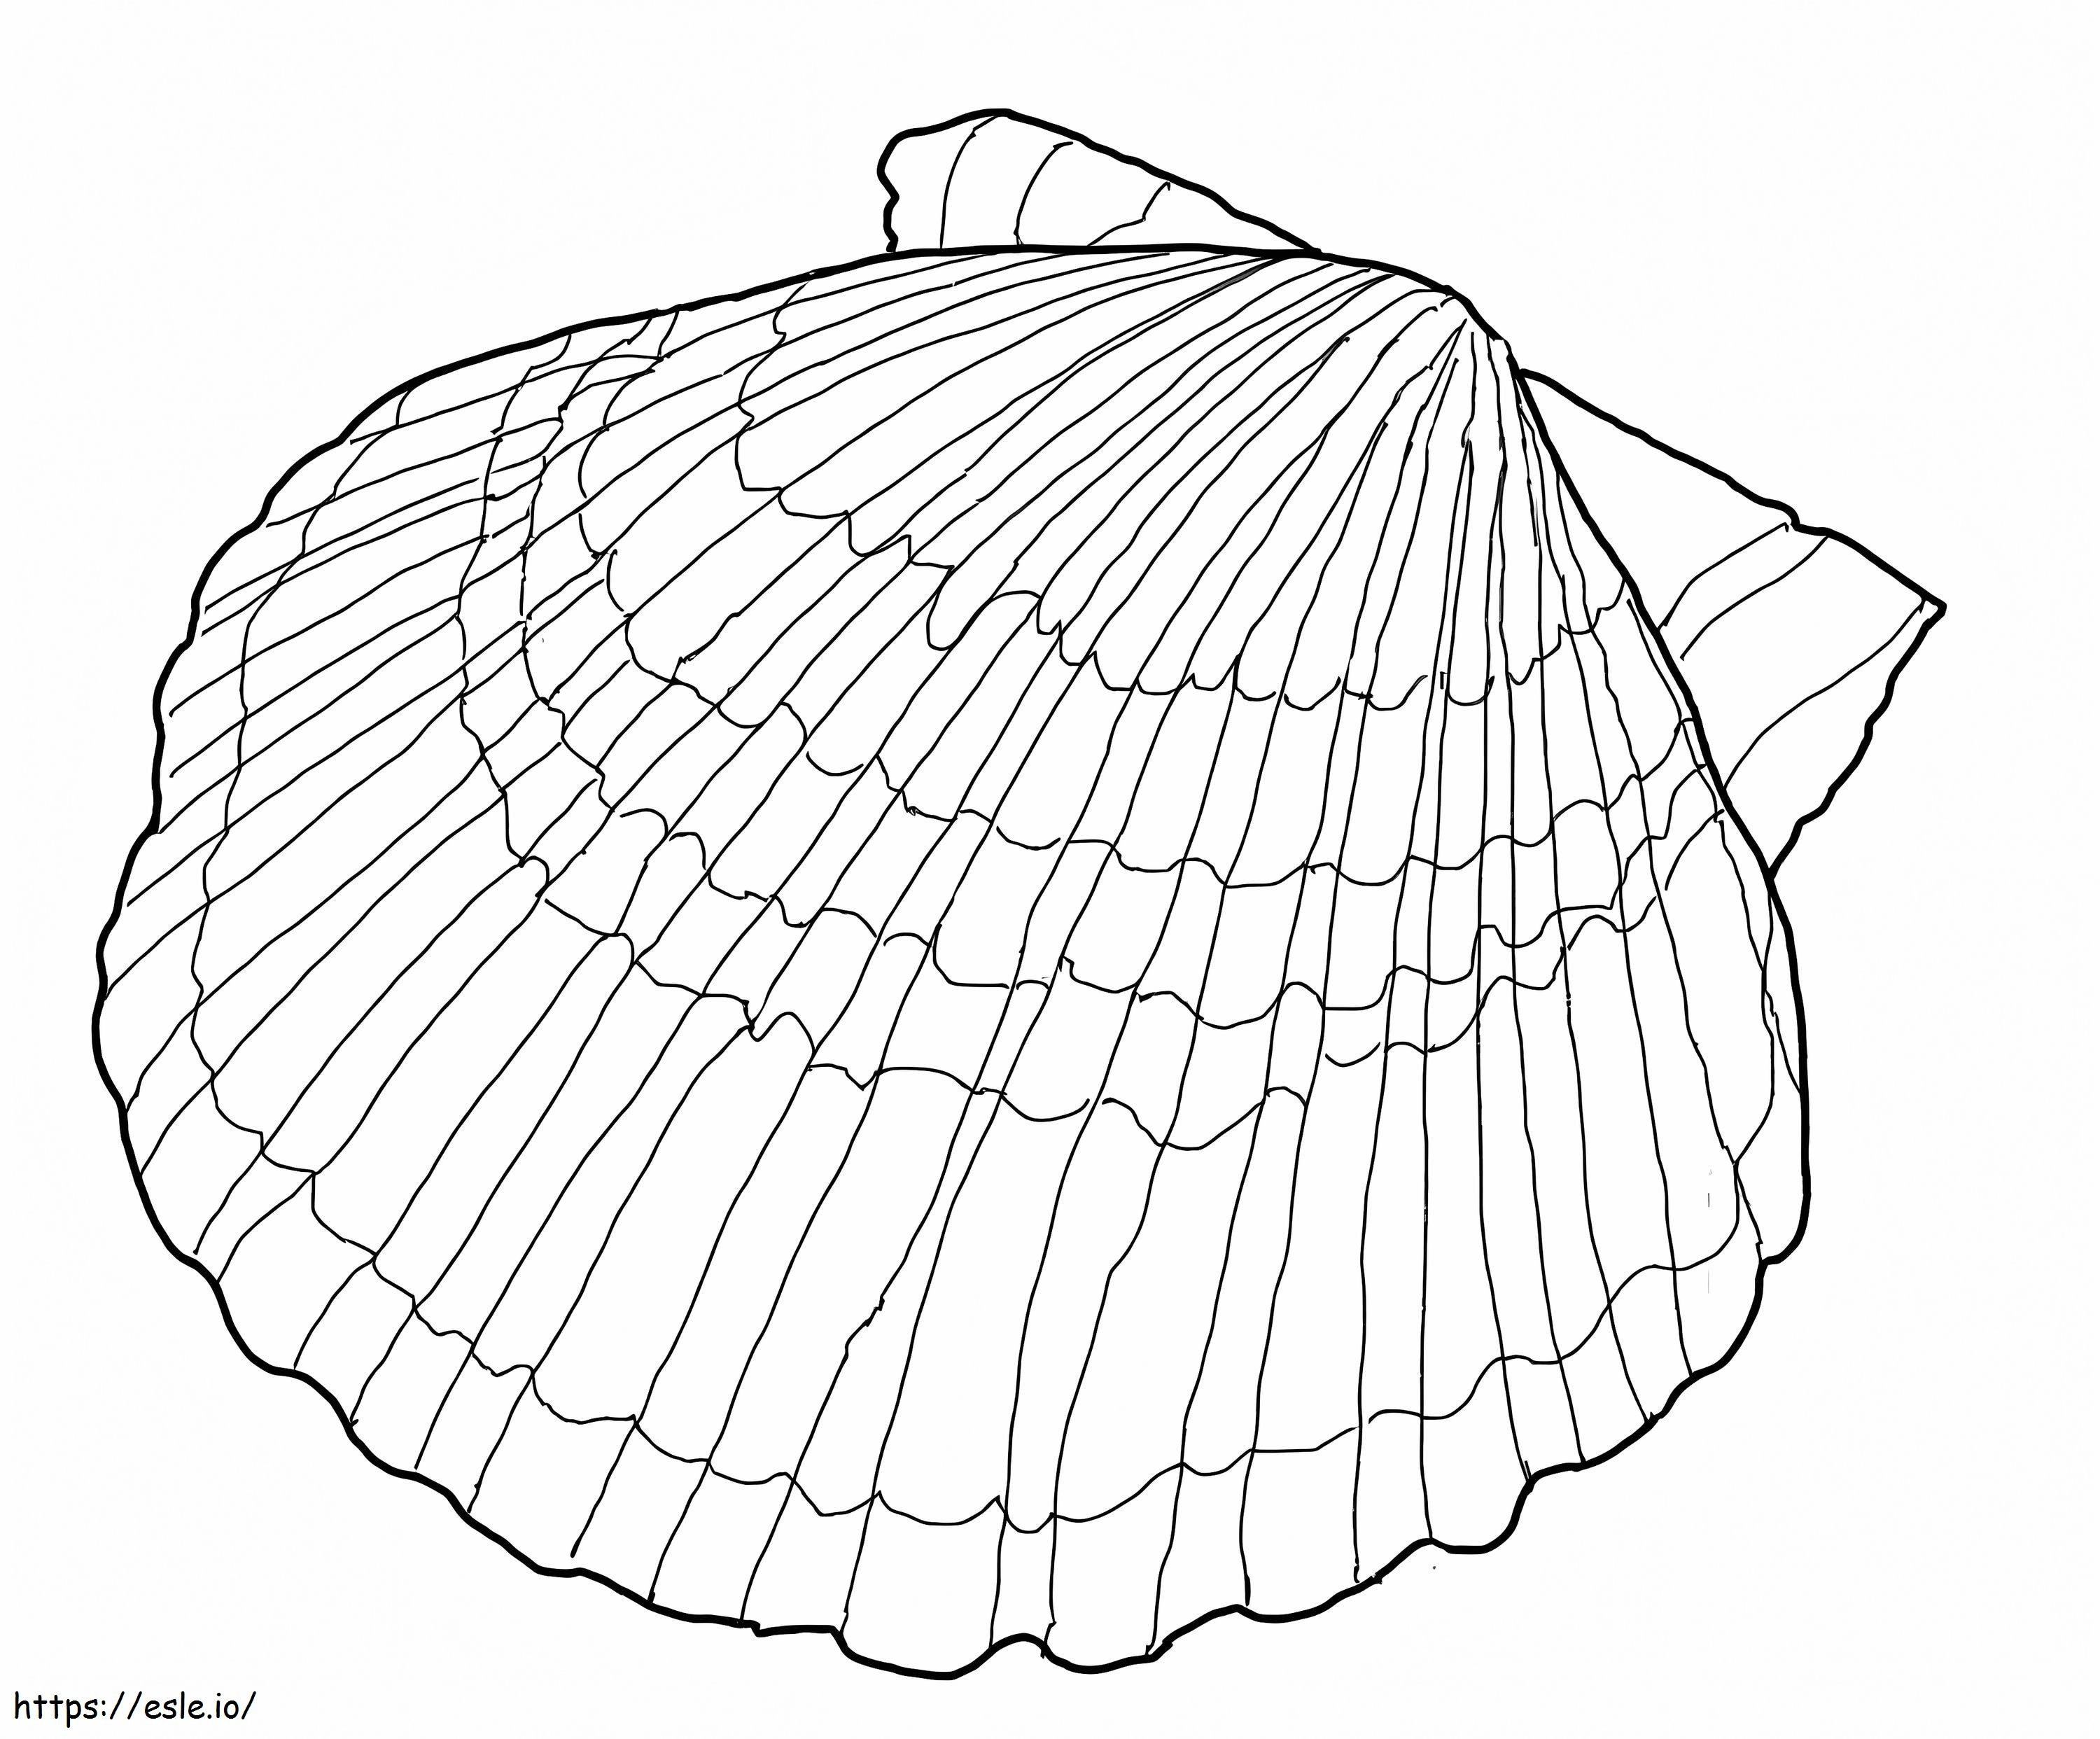 Scallop Shell coloring page